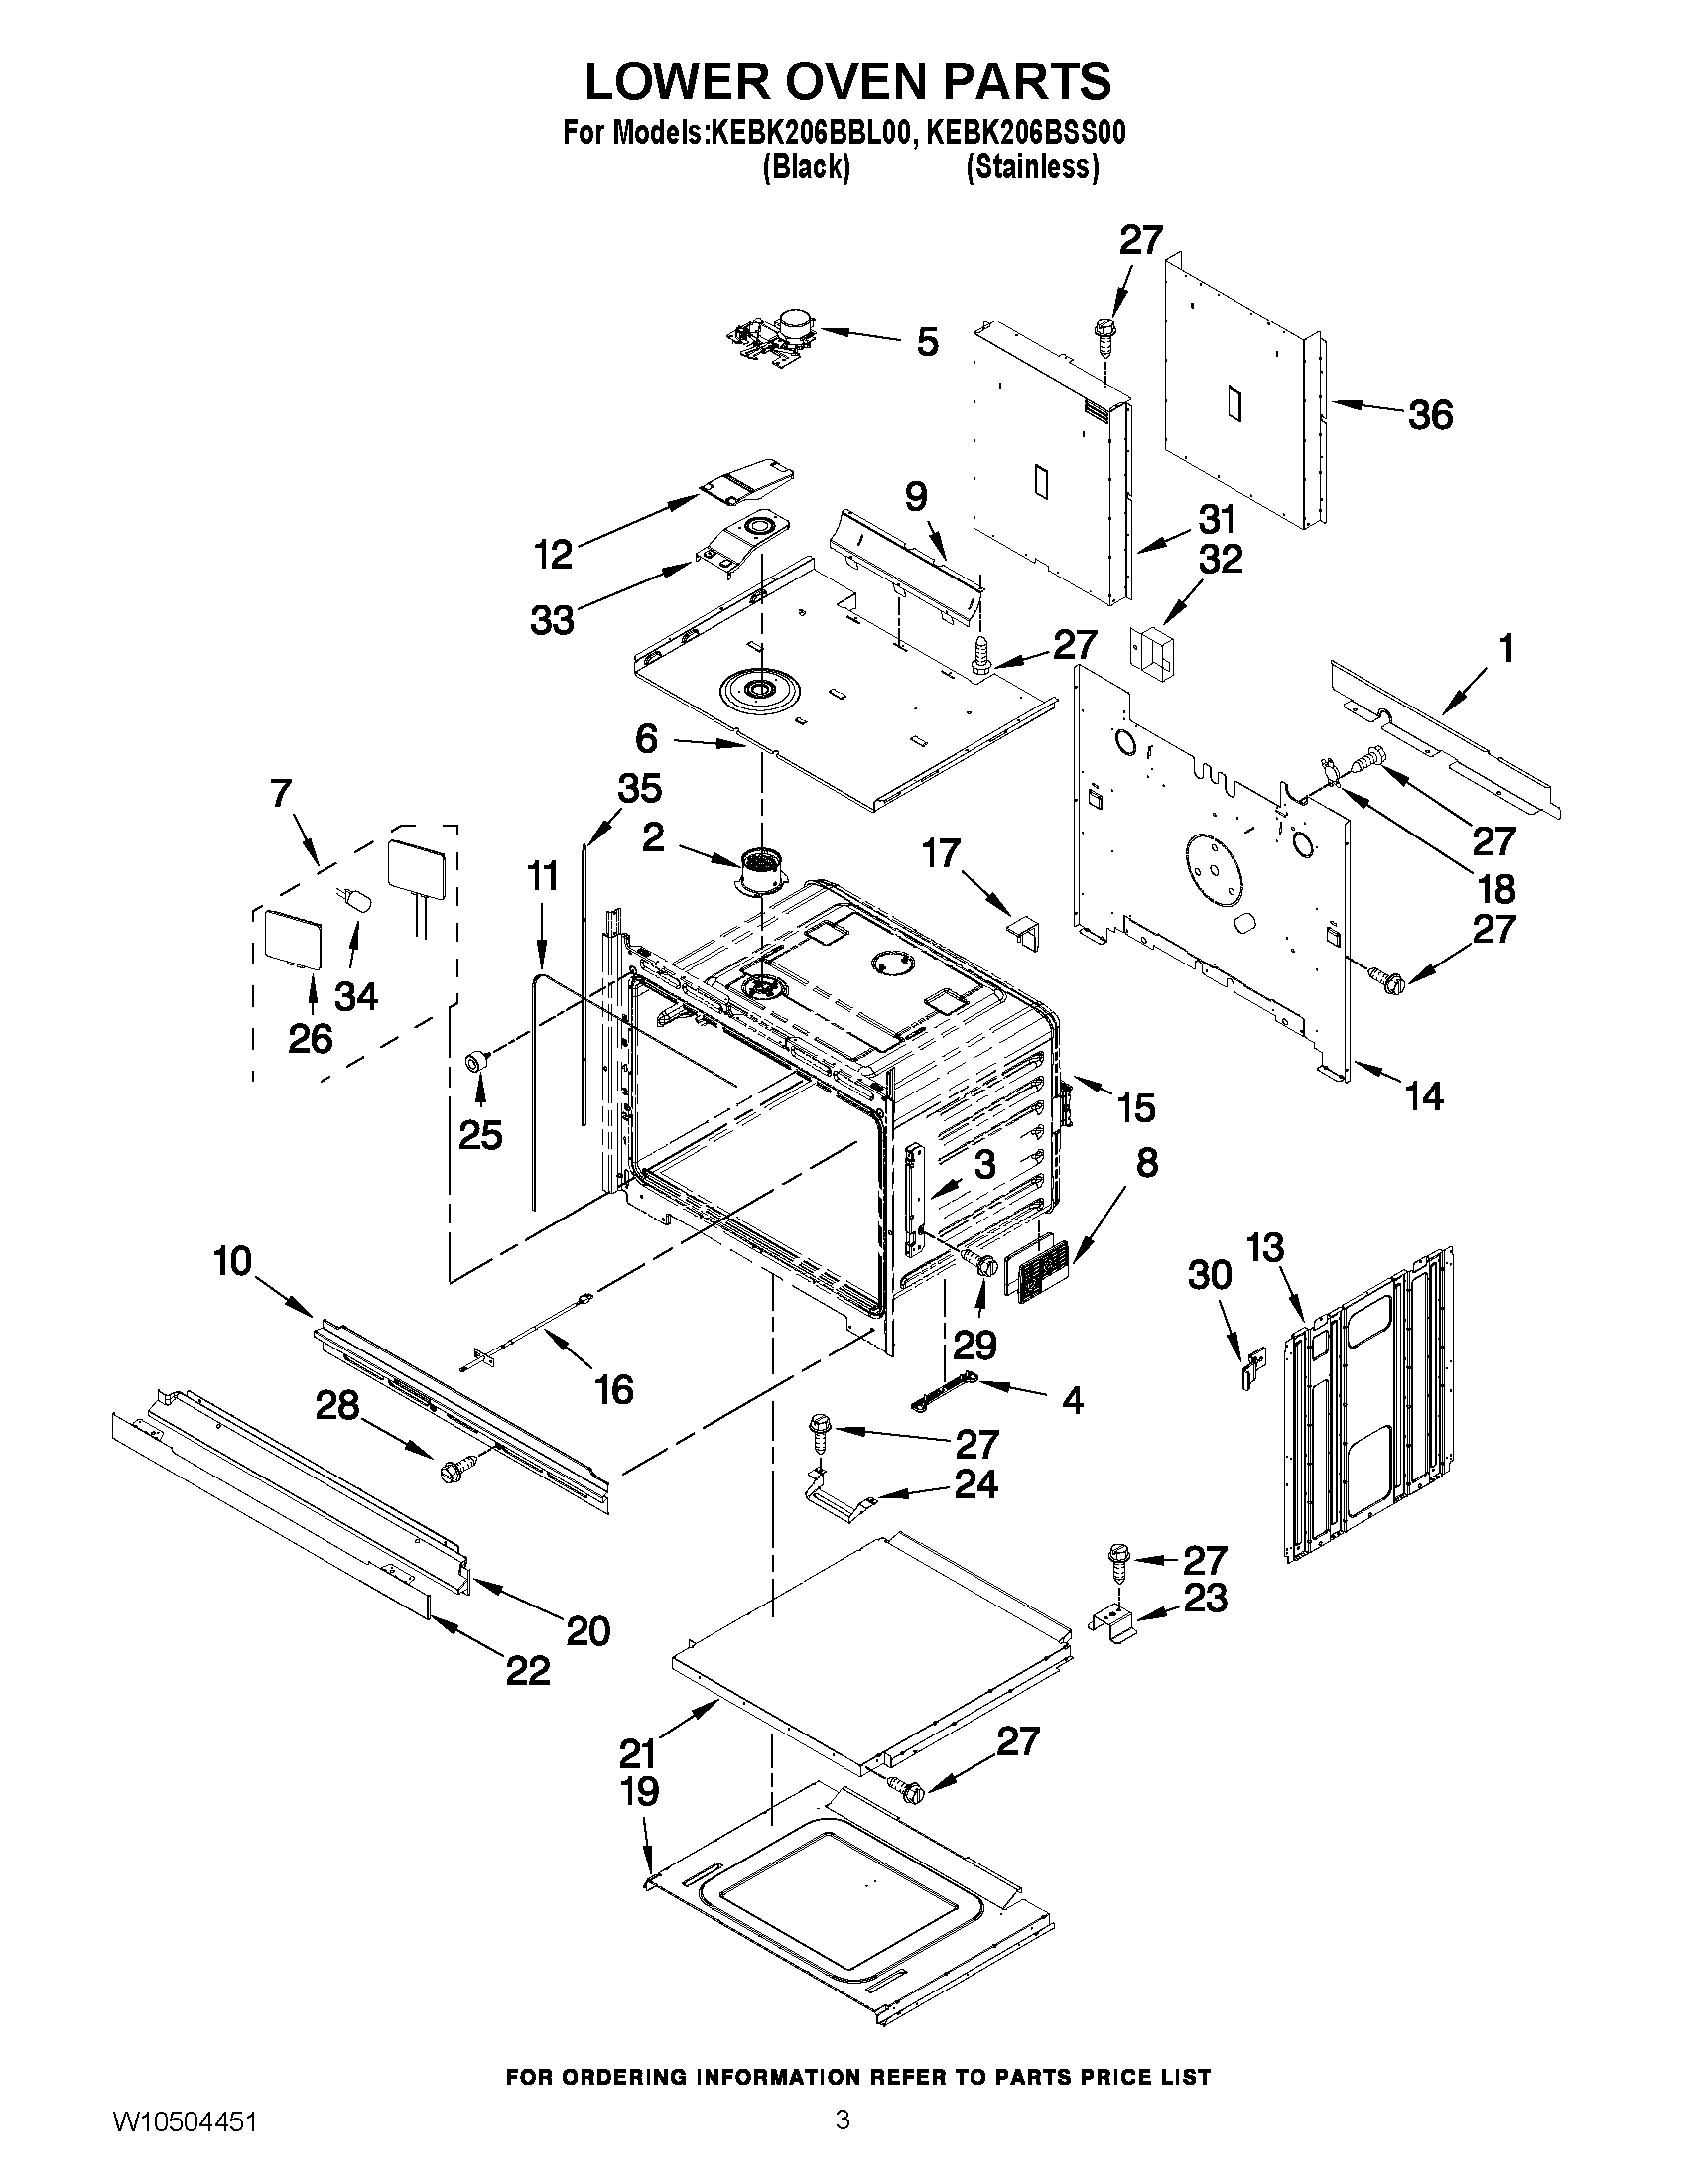 02 - LOWER OVEN PARTS